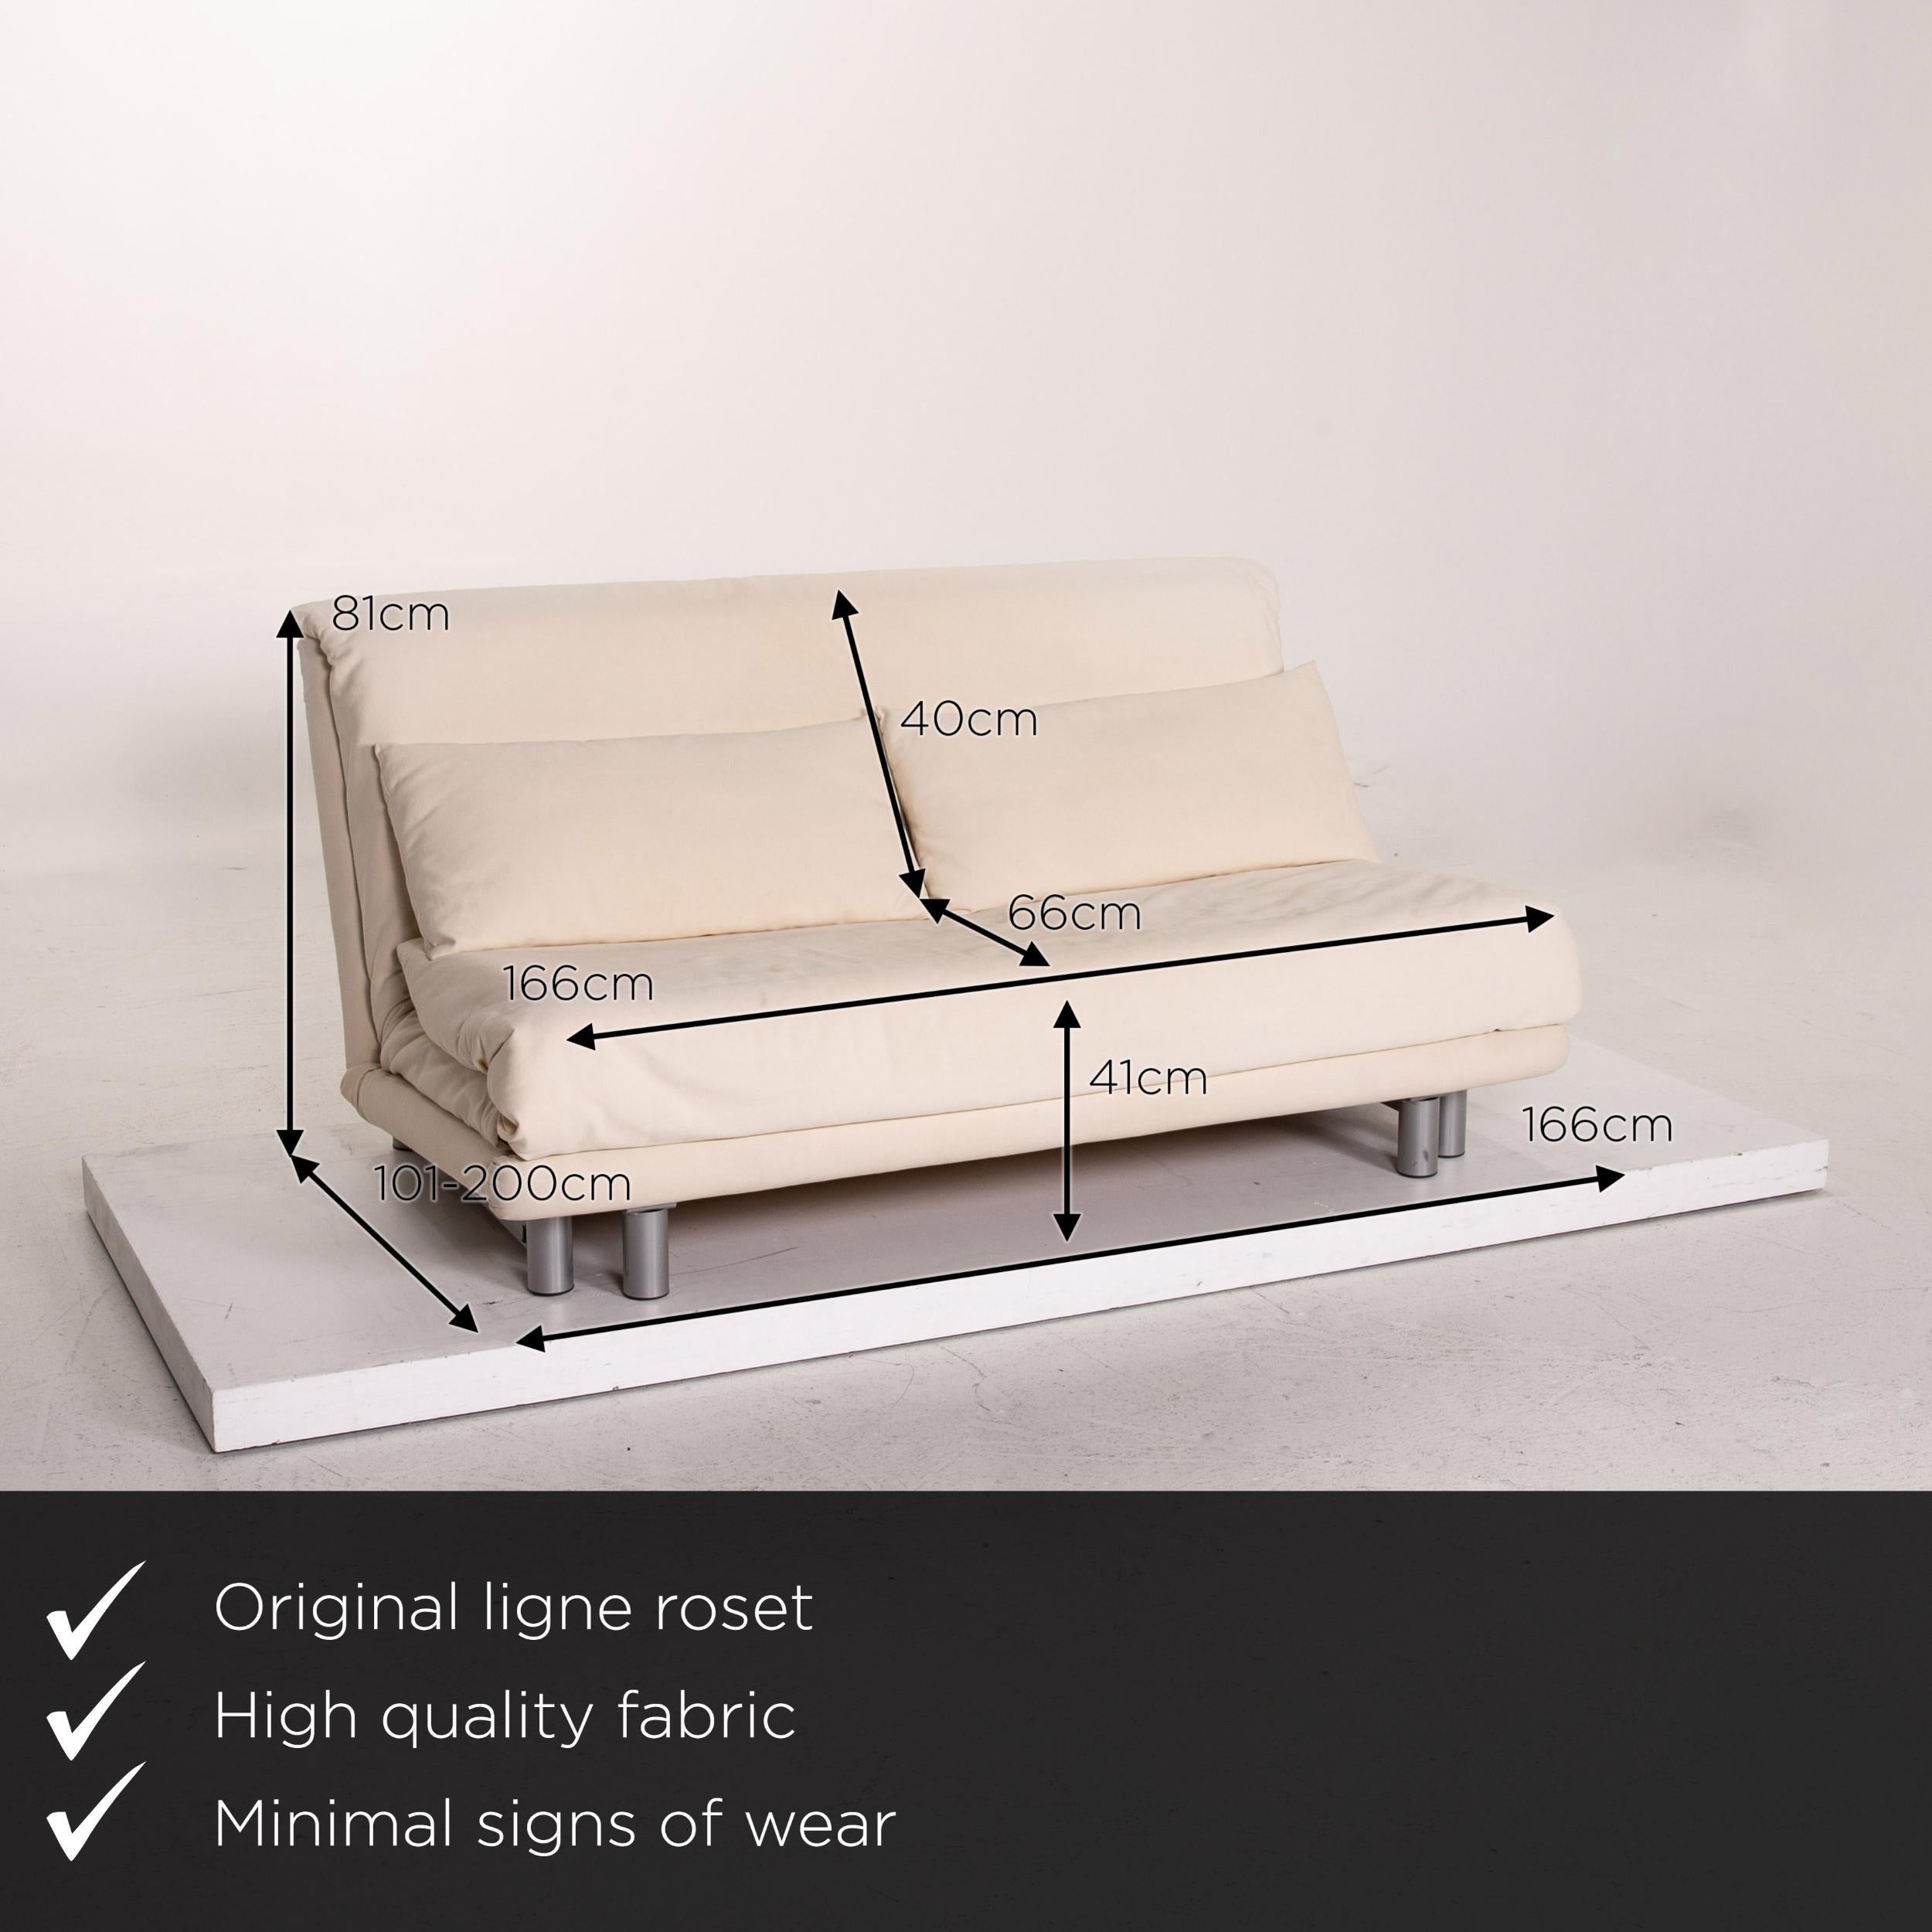 We present to you a Ligne Roset fabric sofa bed cream two-seat function sleeping function couch.


 Product measurements in centimeters:
 

Depth 101
Width 166
Height 81
Seat height 41
Rest height
Seat depth 66
Seat width 166
Back